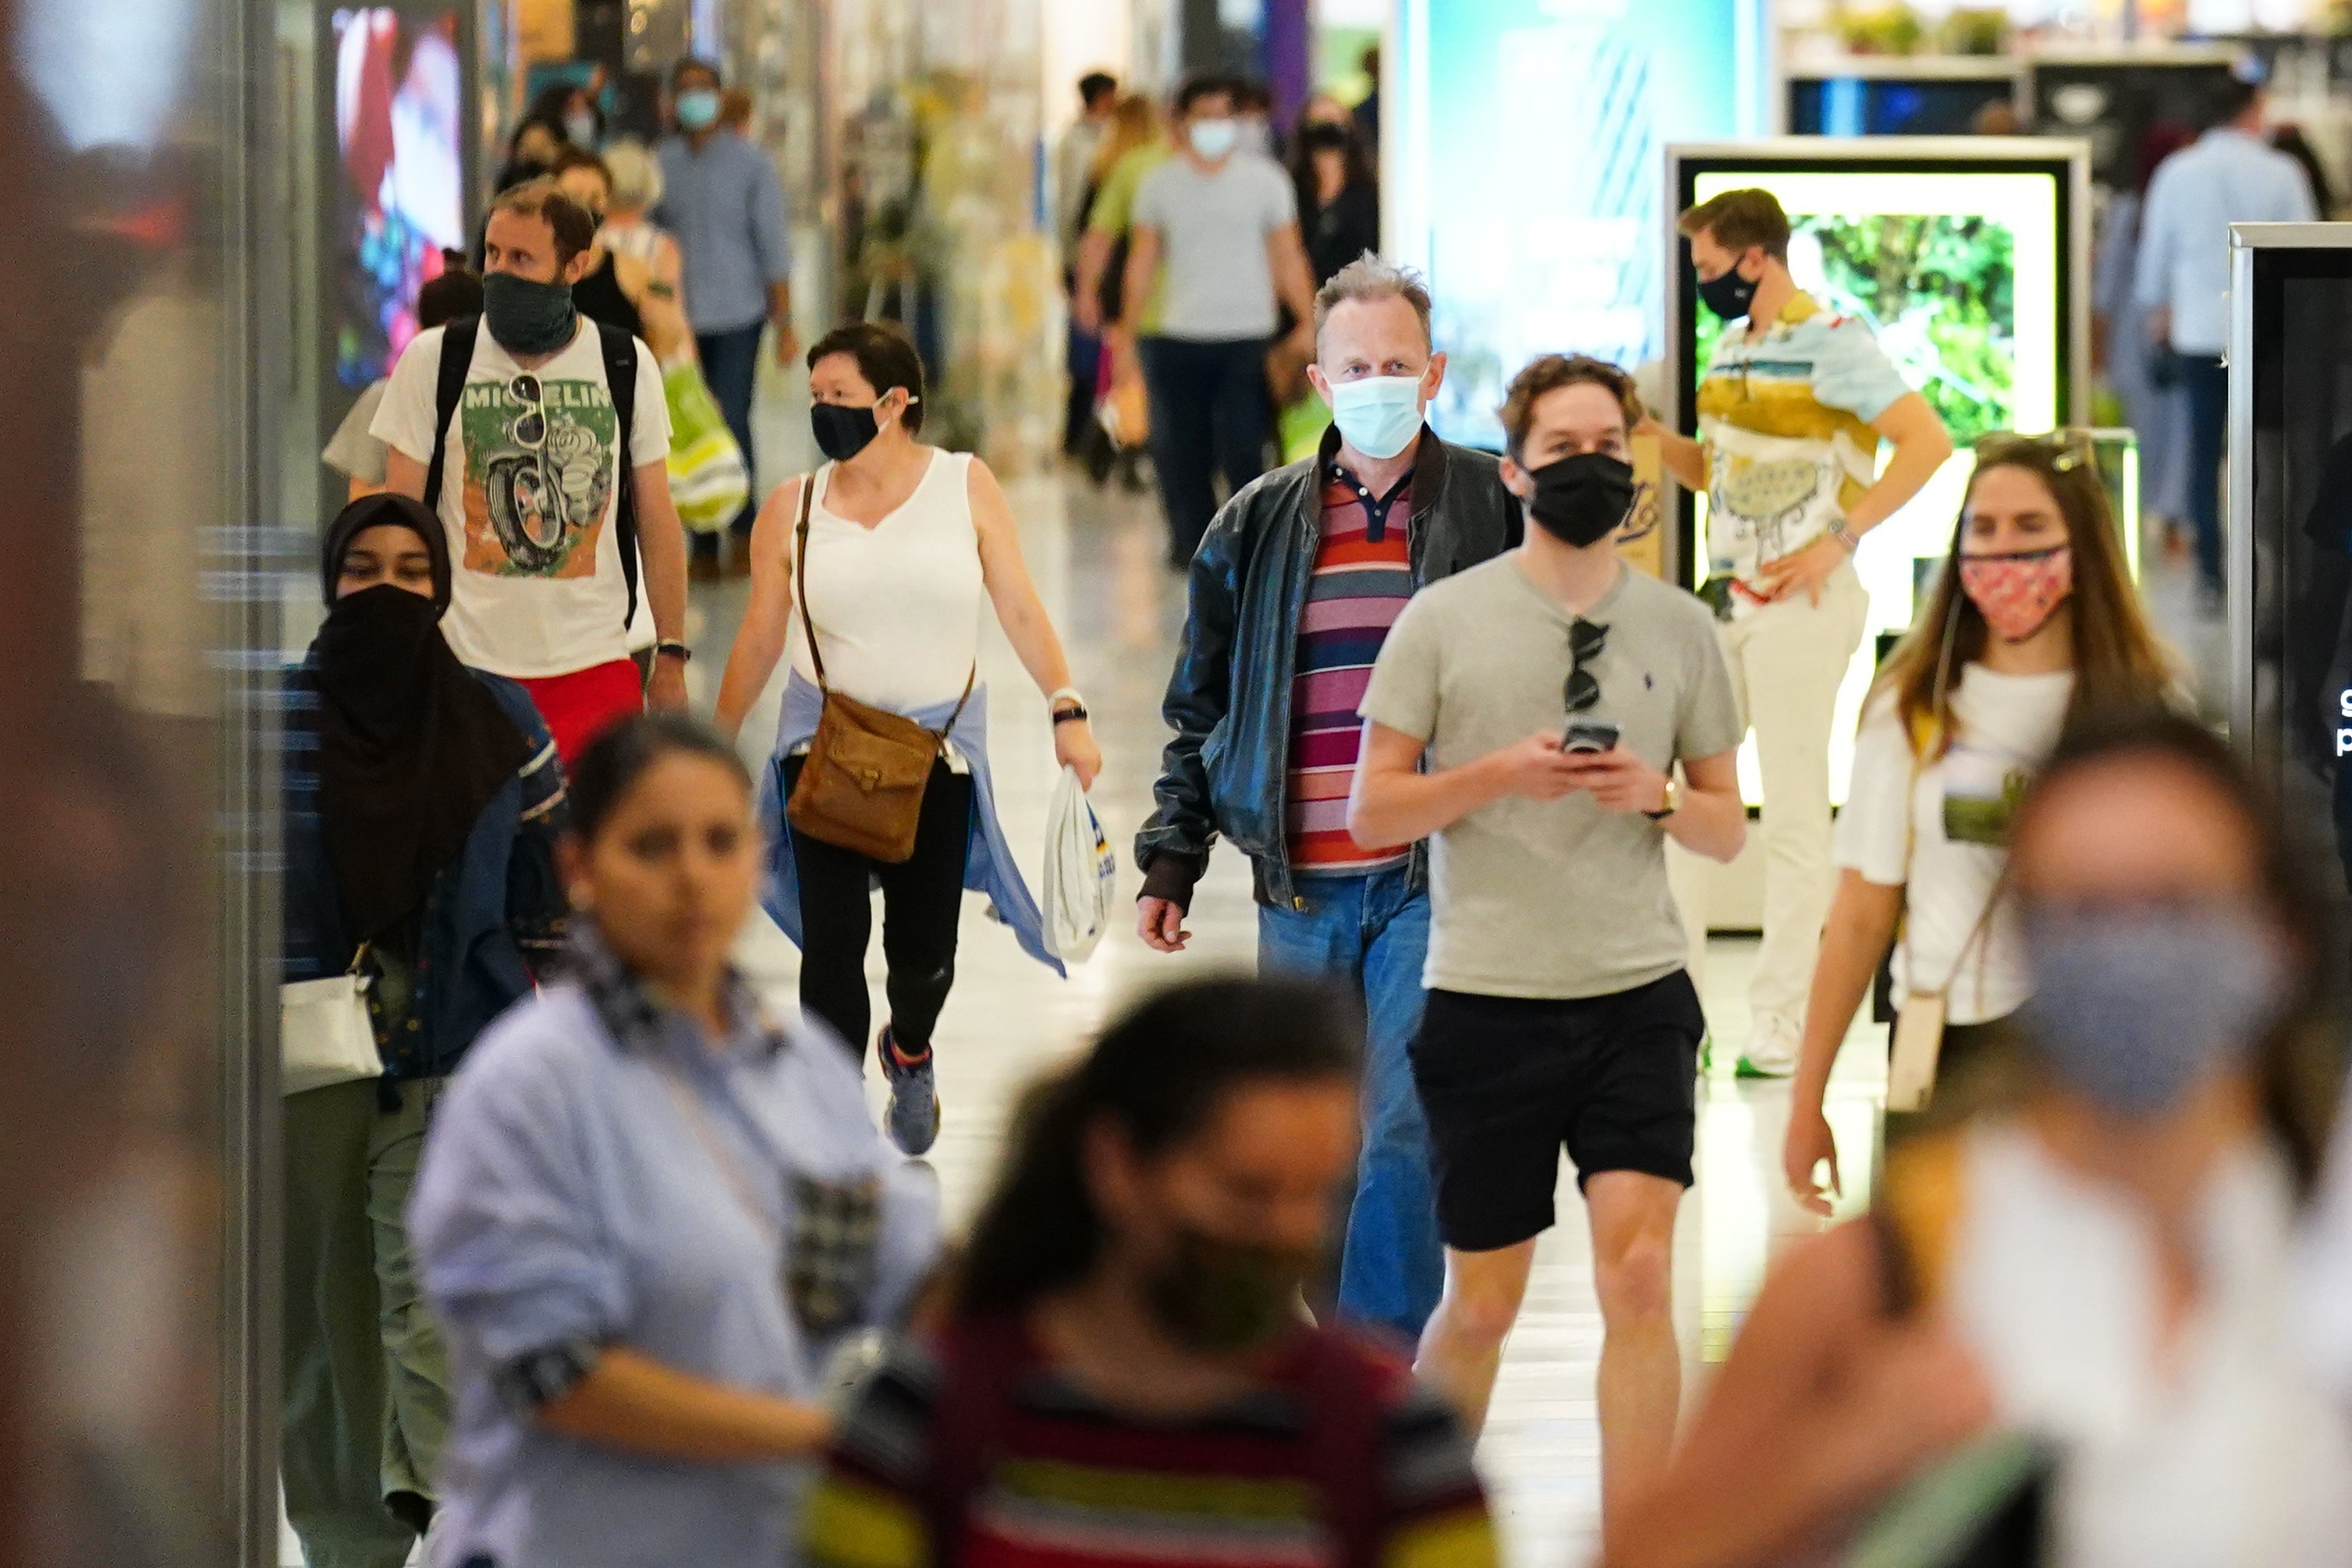 Shoppers in masks